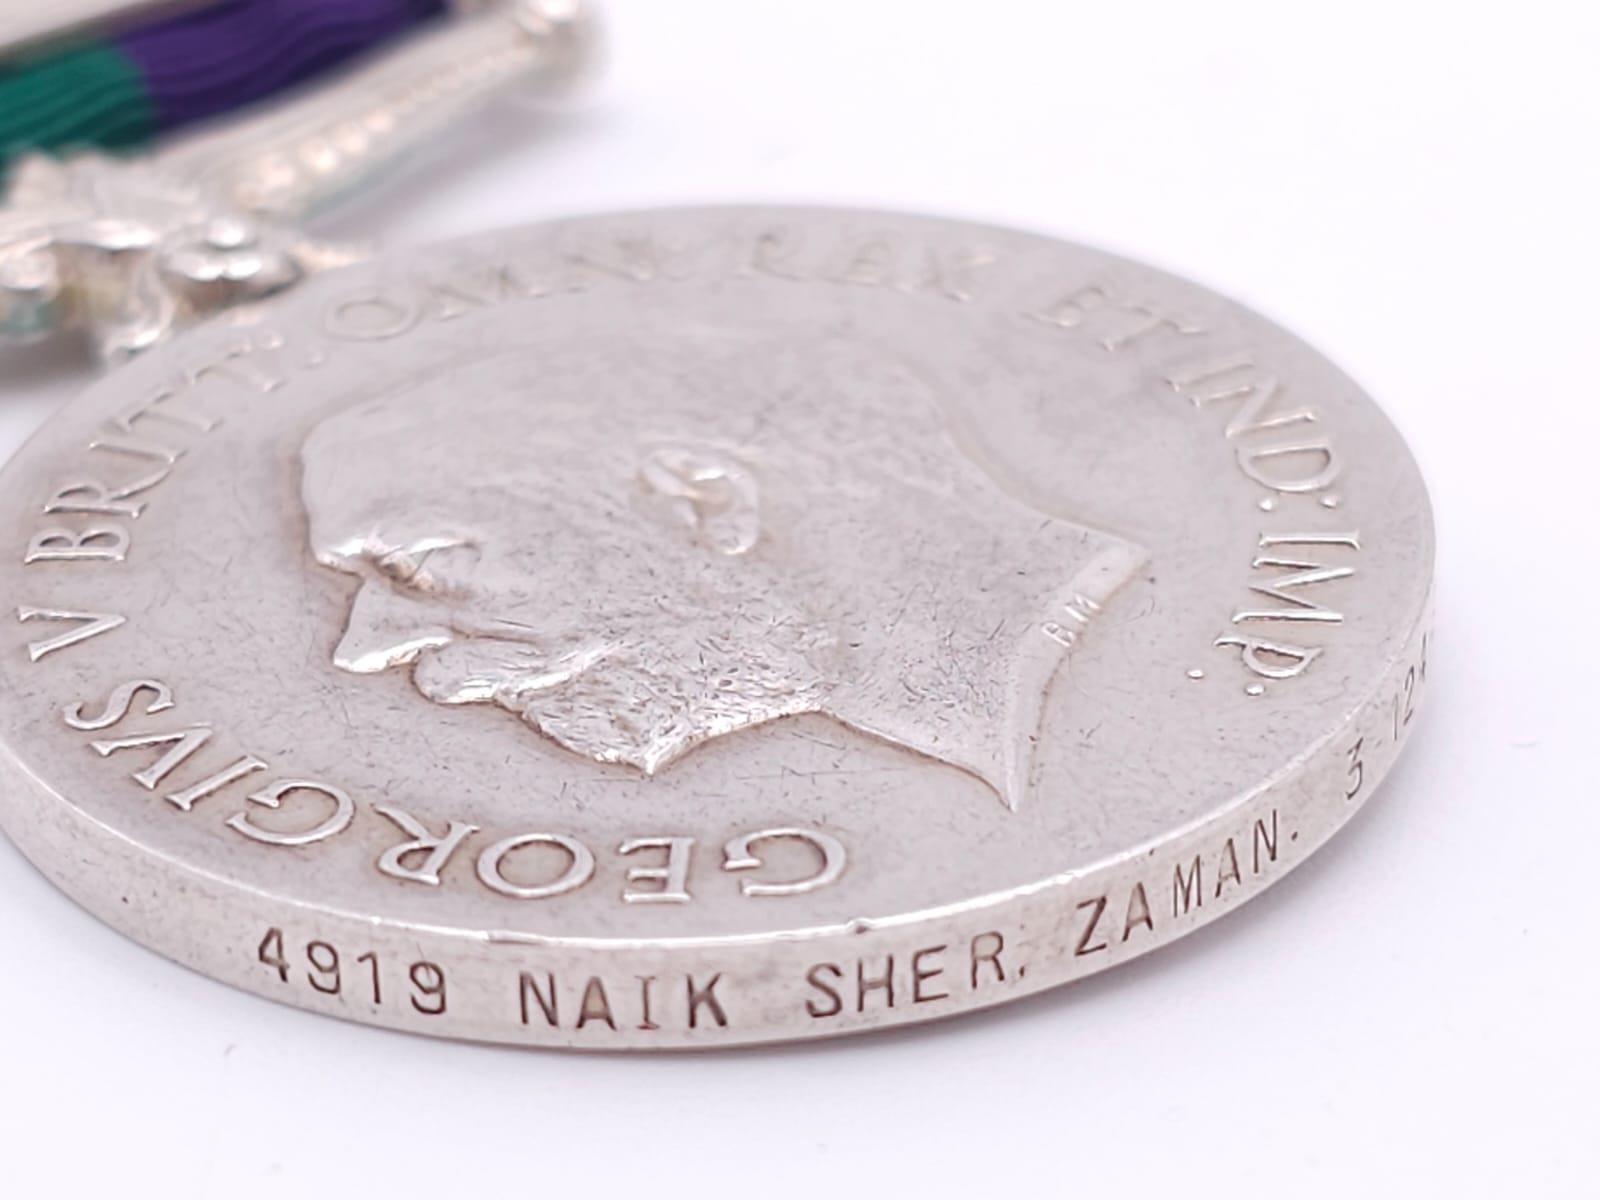 General Service Medal 1918 with two clasps: ‘S. Persia’ and ‘Iraq’, named to: 4919 Naik Sher Zaman 3 - Image 4 of 6